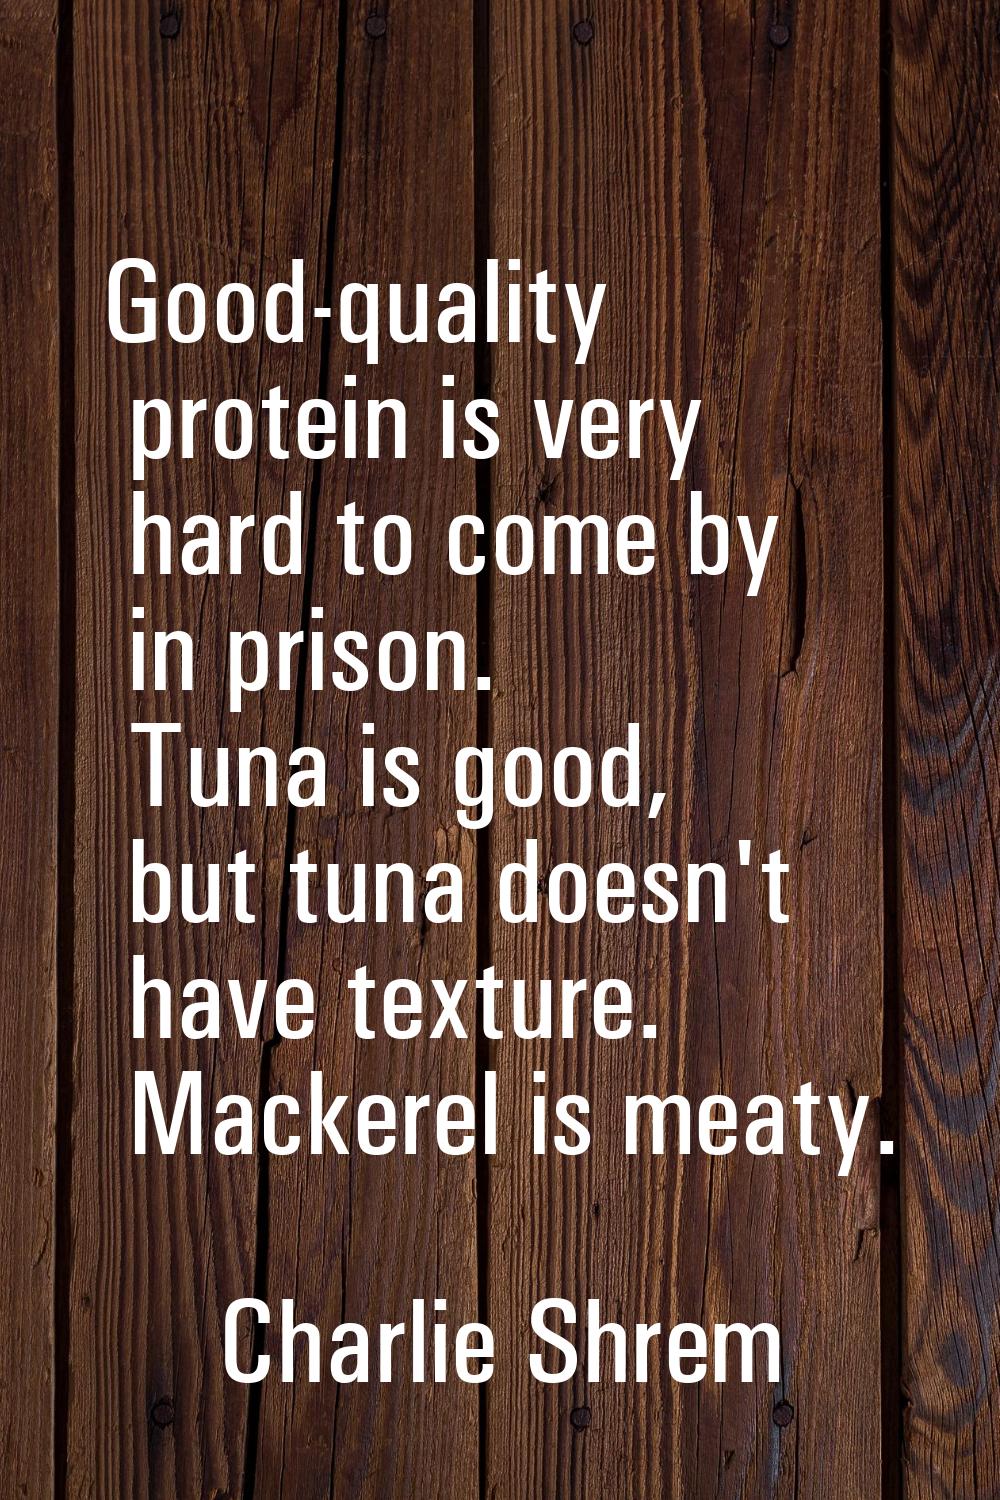 Good-quality protein is very hard to come by in prison. Tuna is good, but tuna doesn't have texture